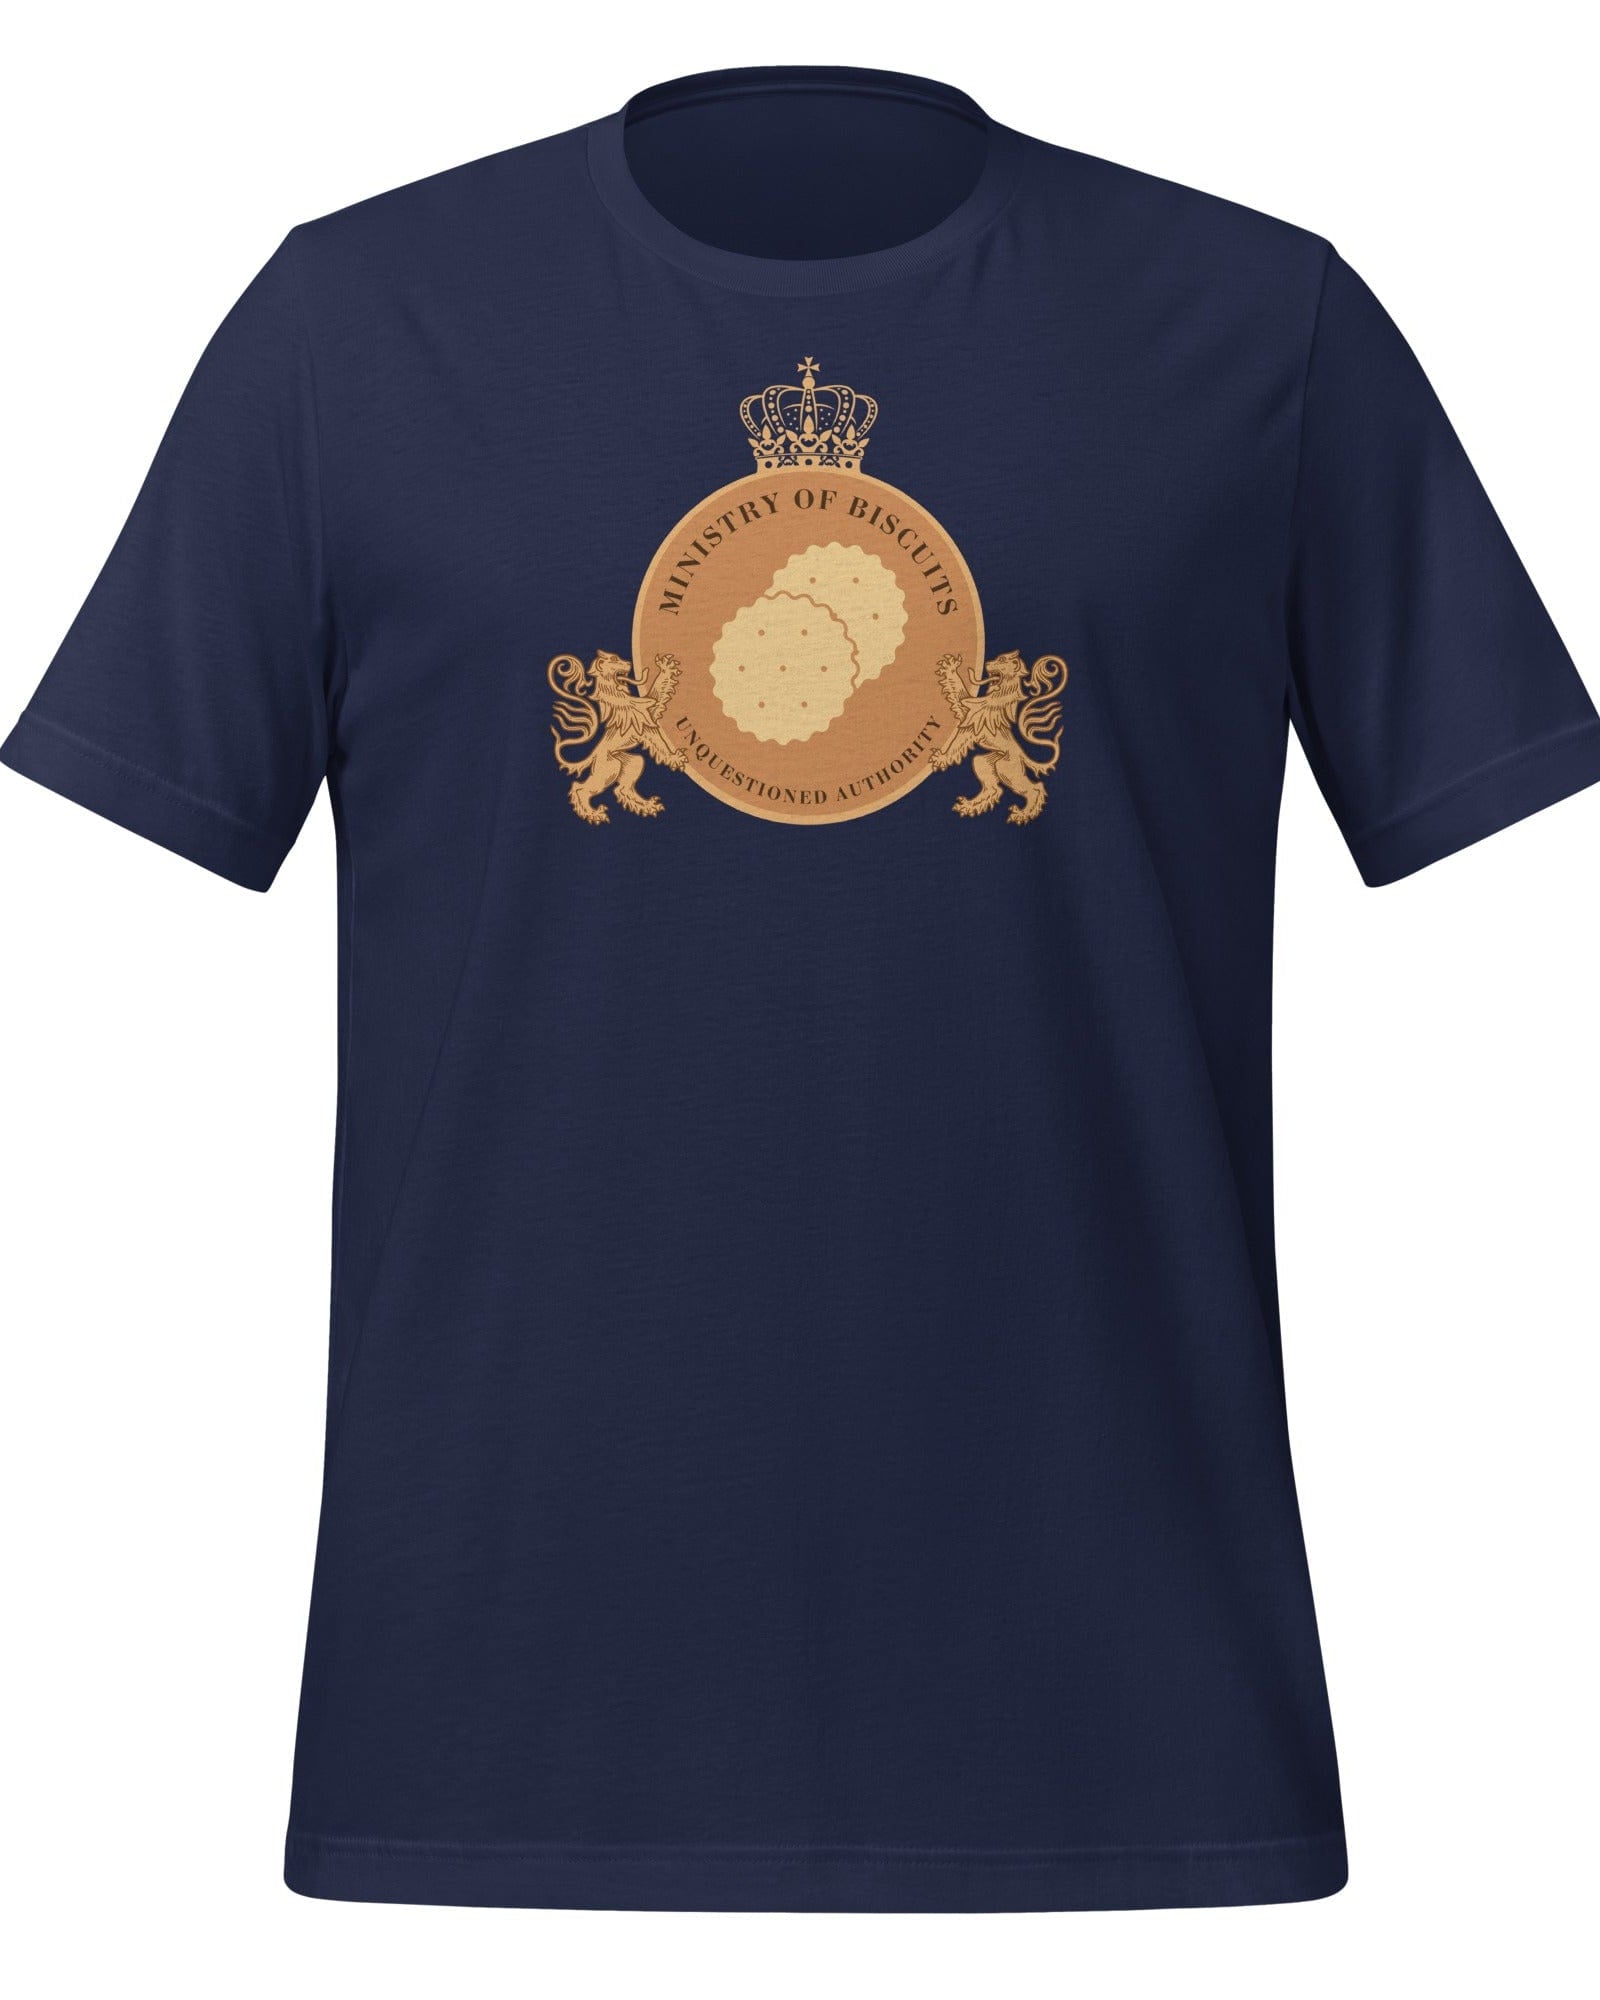 Ministry of Biscuits T-Shirt Navy / S Shirts & Tops Jolly & Goode